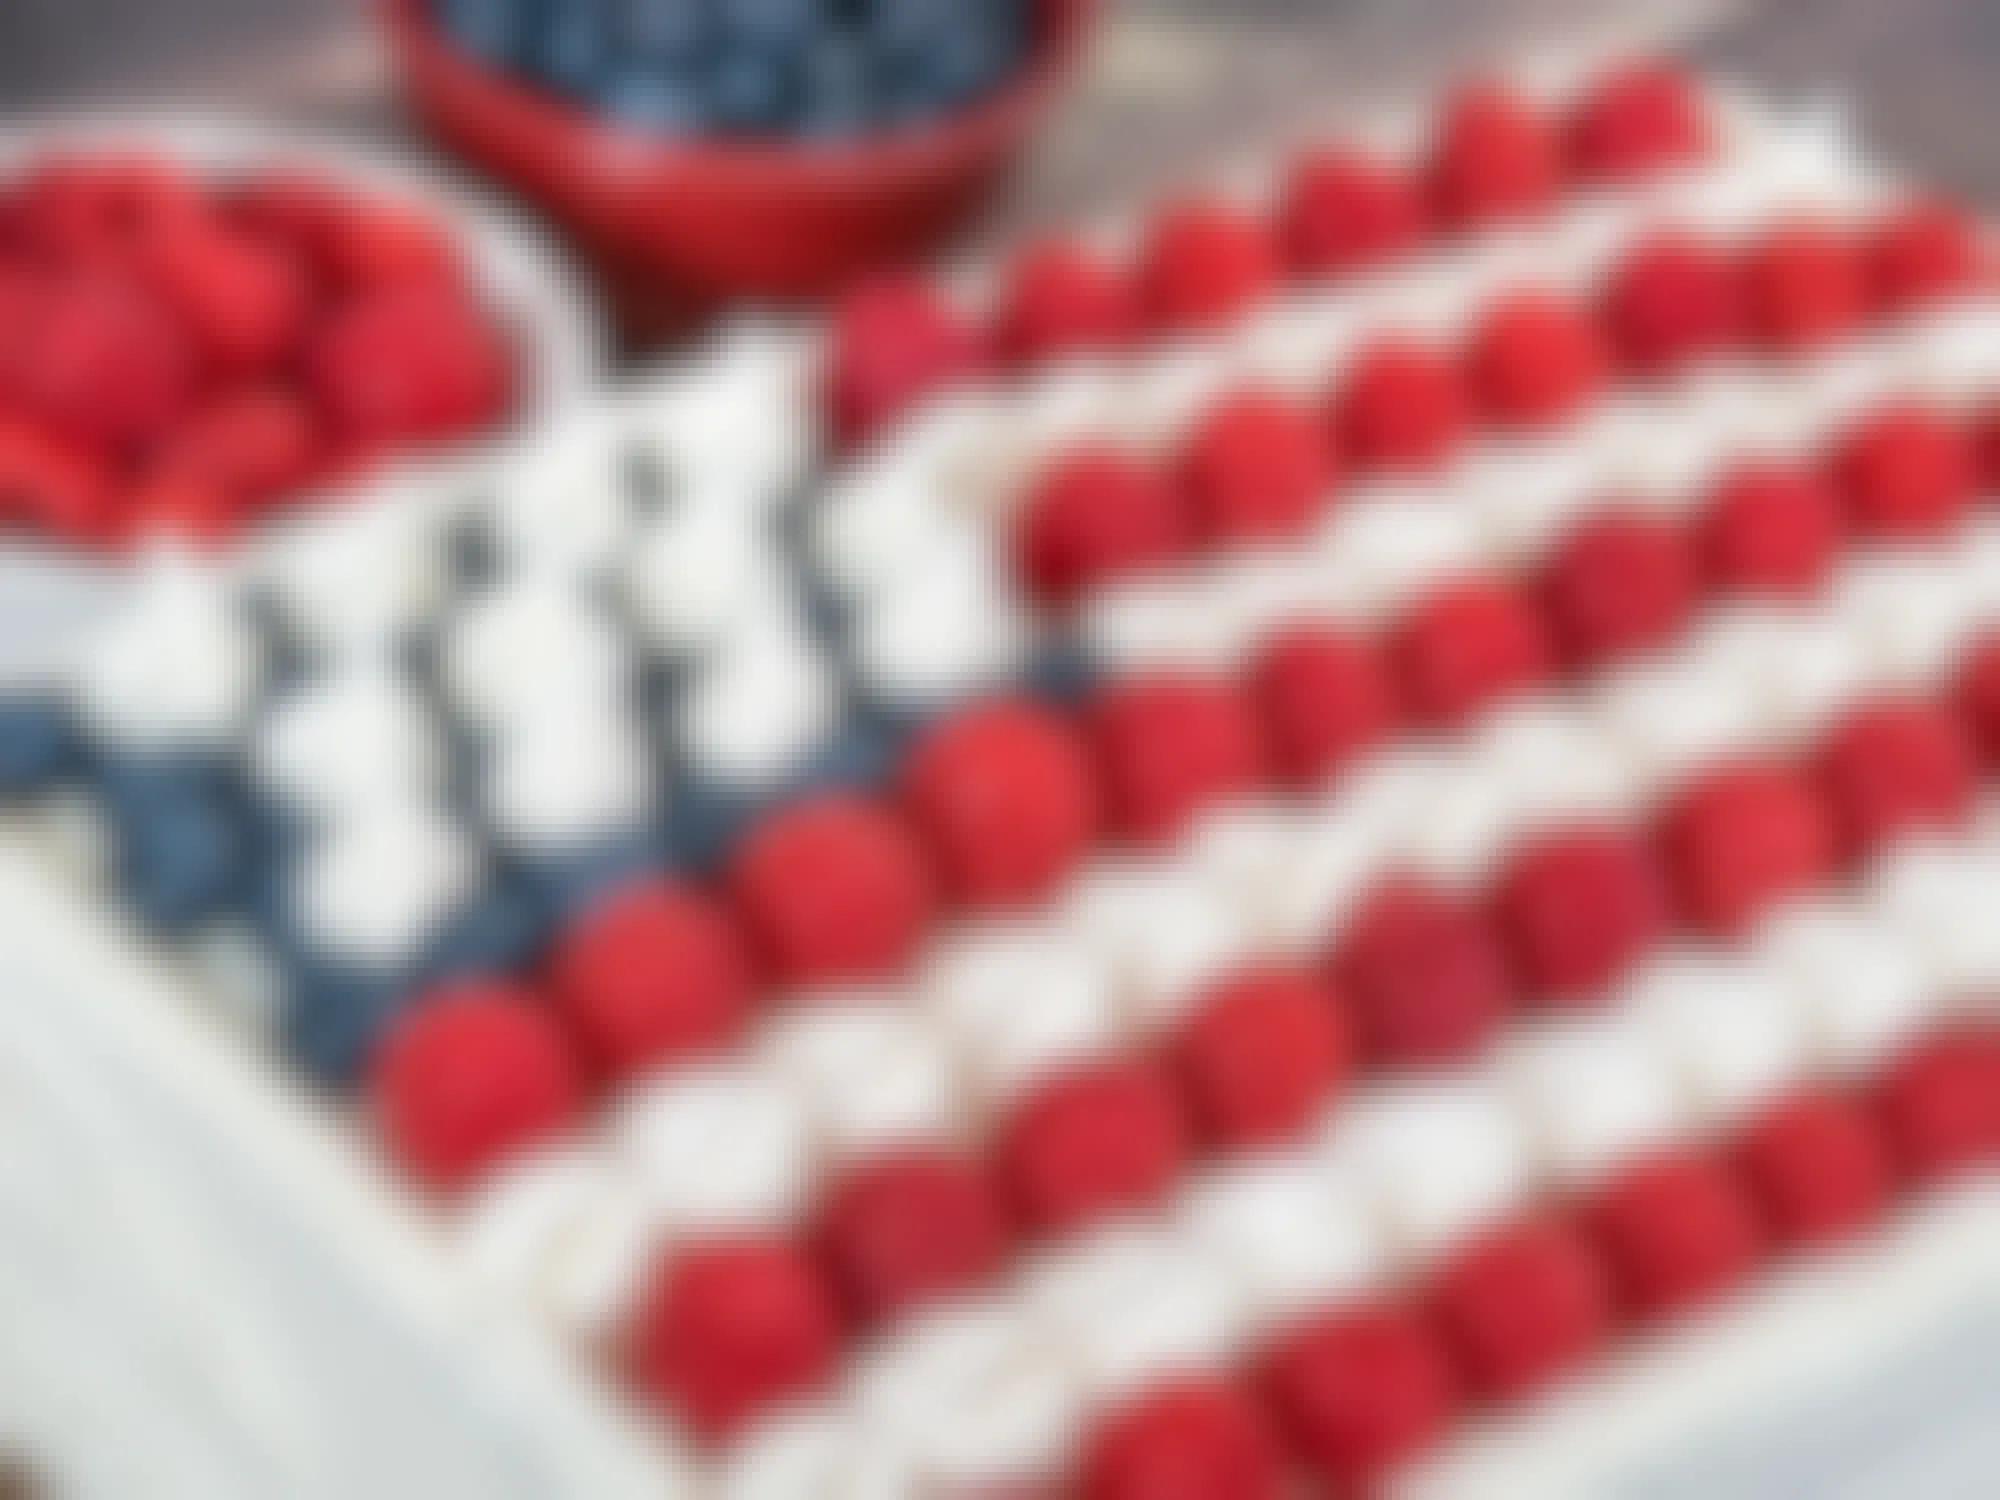 Patriotic, red white and blue, American flag cake. Fresh blueberries and raspberries in the background